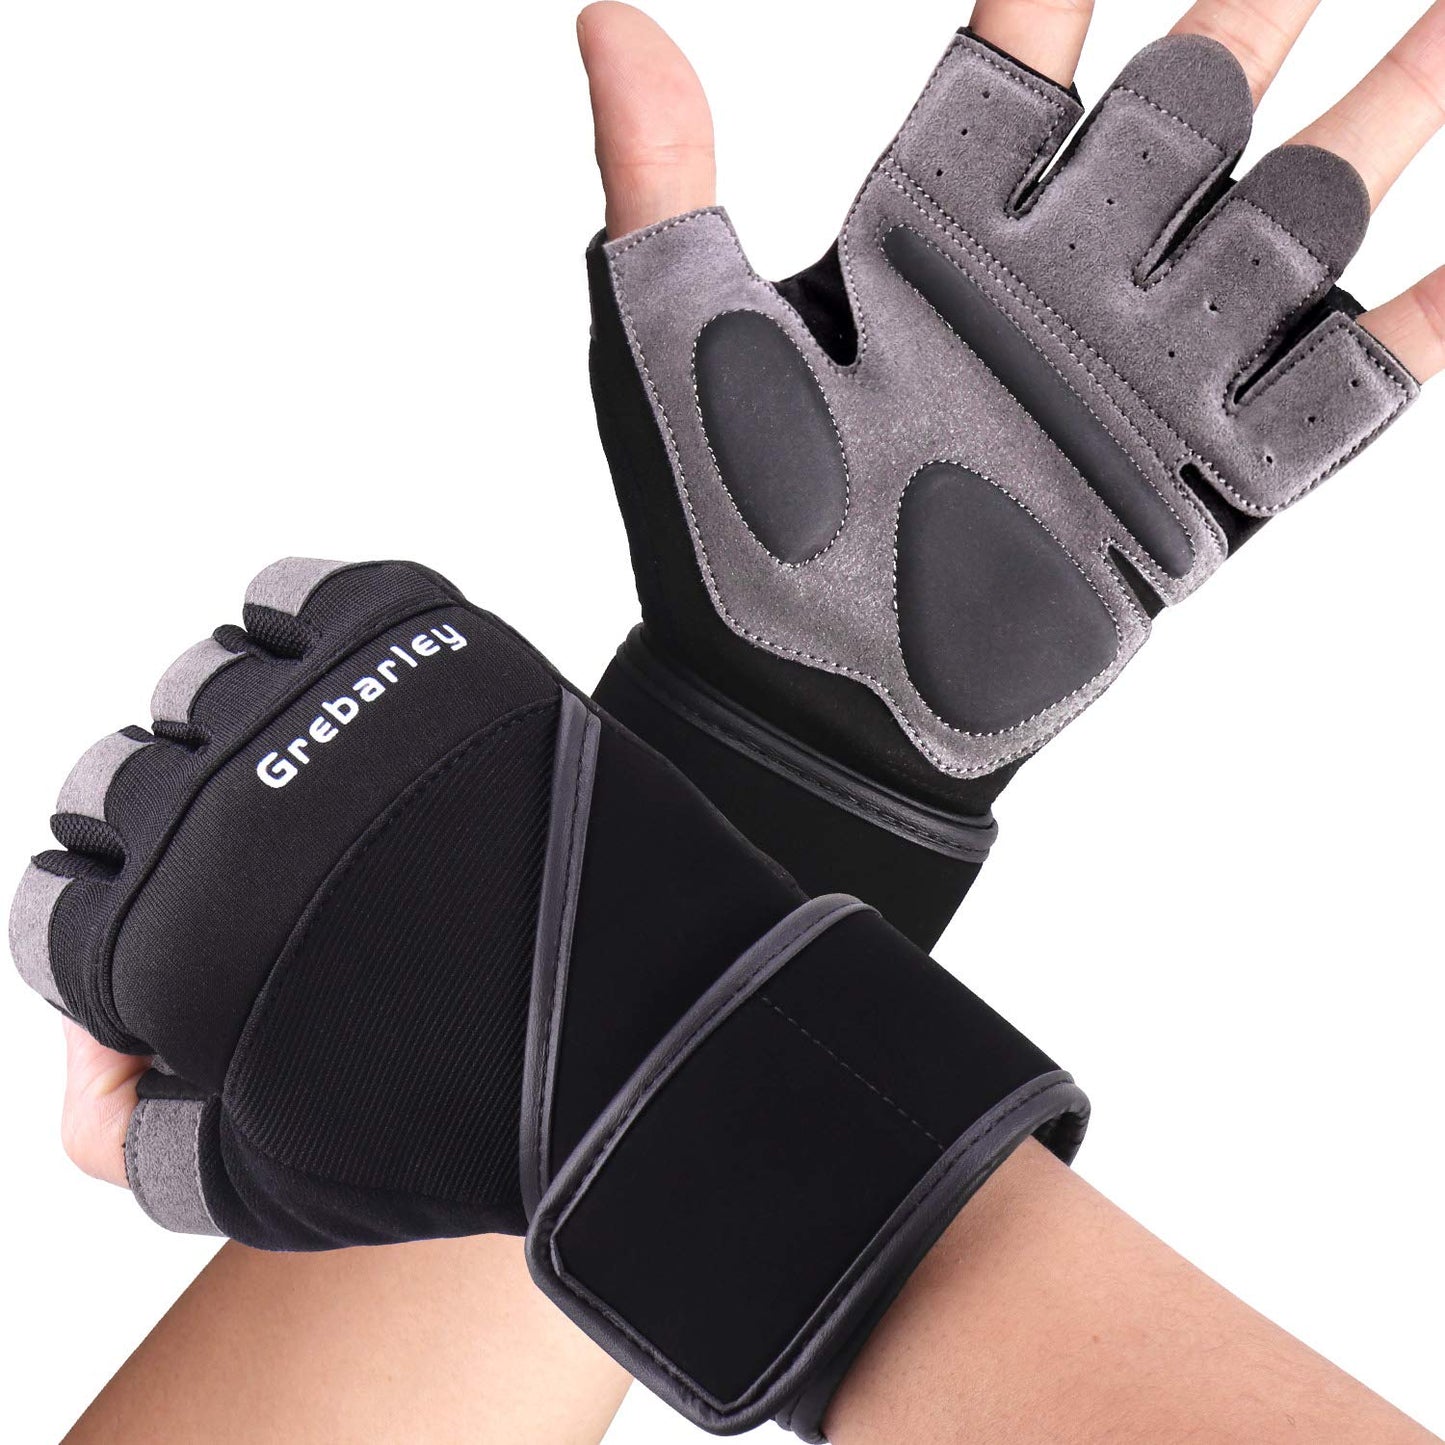 Weightlifting Gym Gloves Fitness Wrist Wraps Exercise Black & Grey